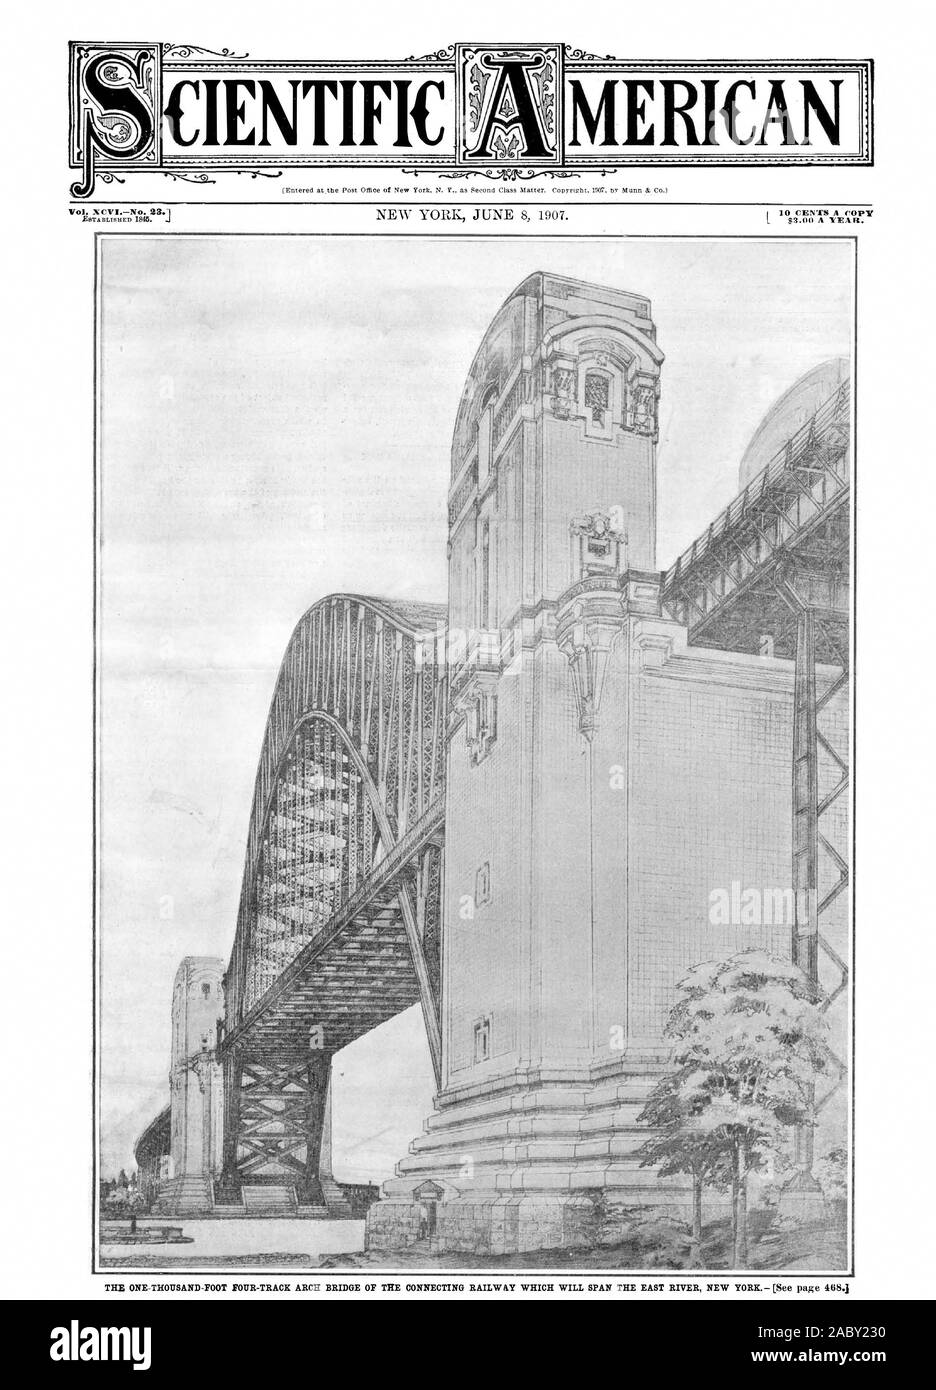 Vol. XCVINo. 23.1 MERICA, scientific american, 1907-06-08, the one thousand foot four track arch bridge of the connecting railway which will span the East River, New York Stock Photo